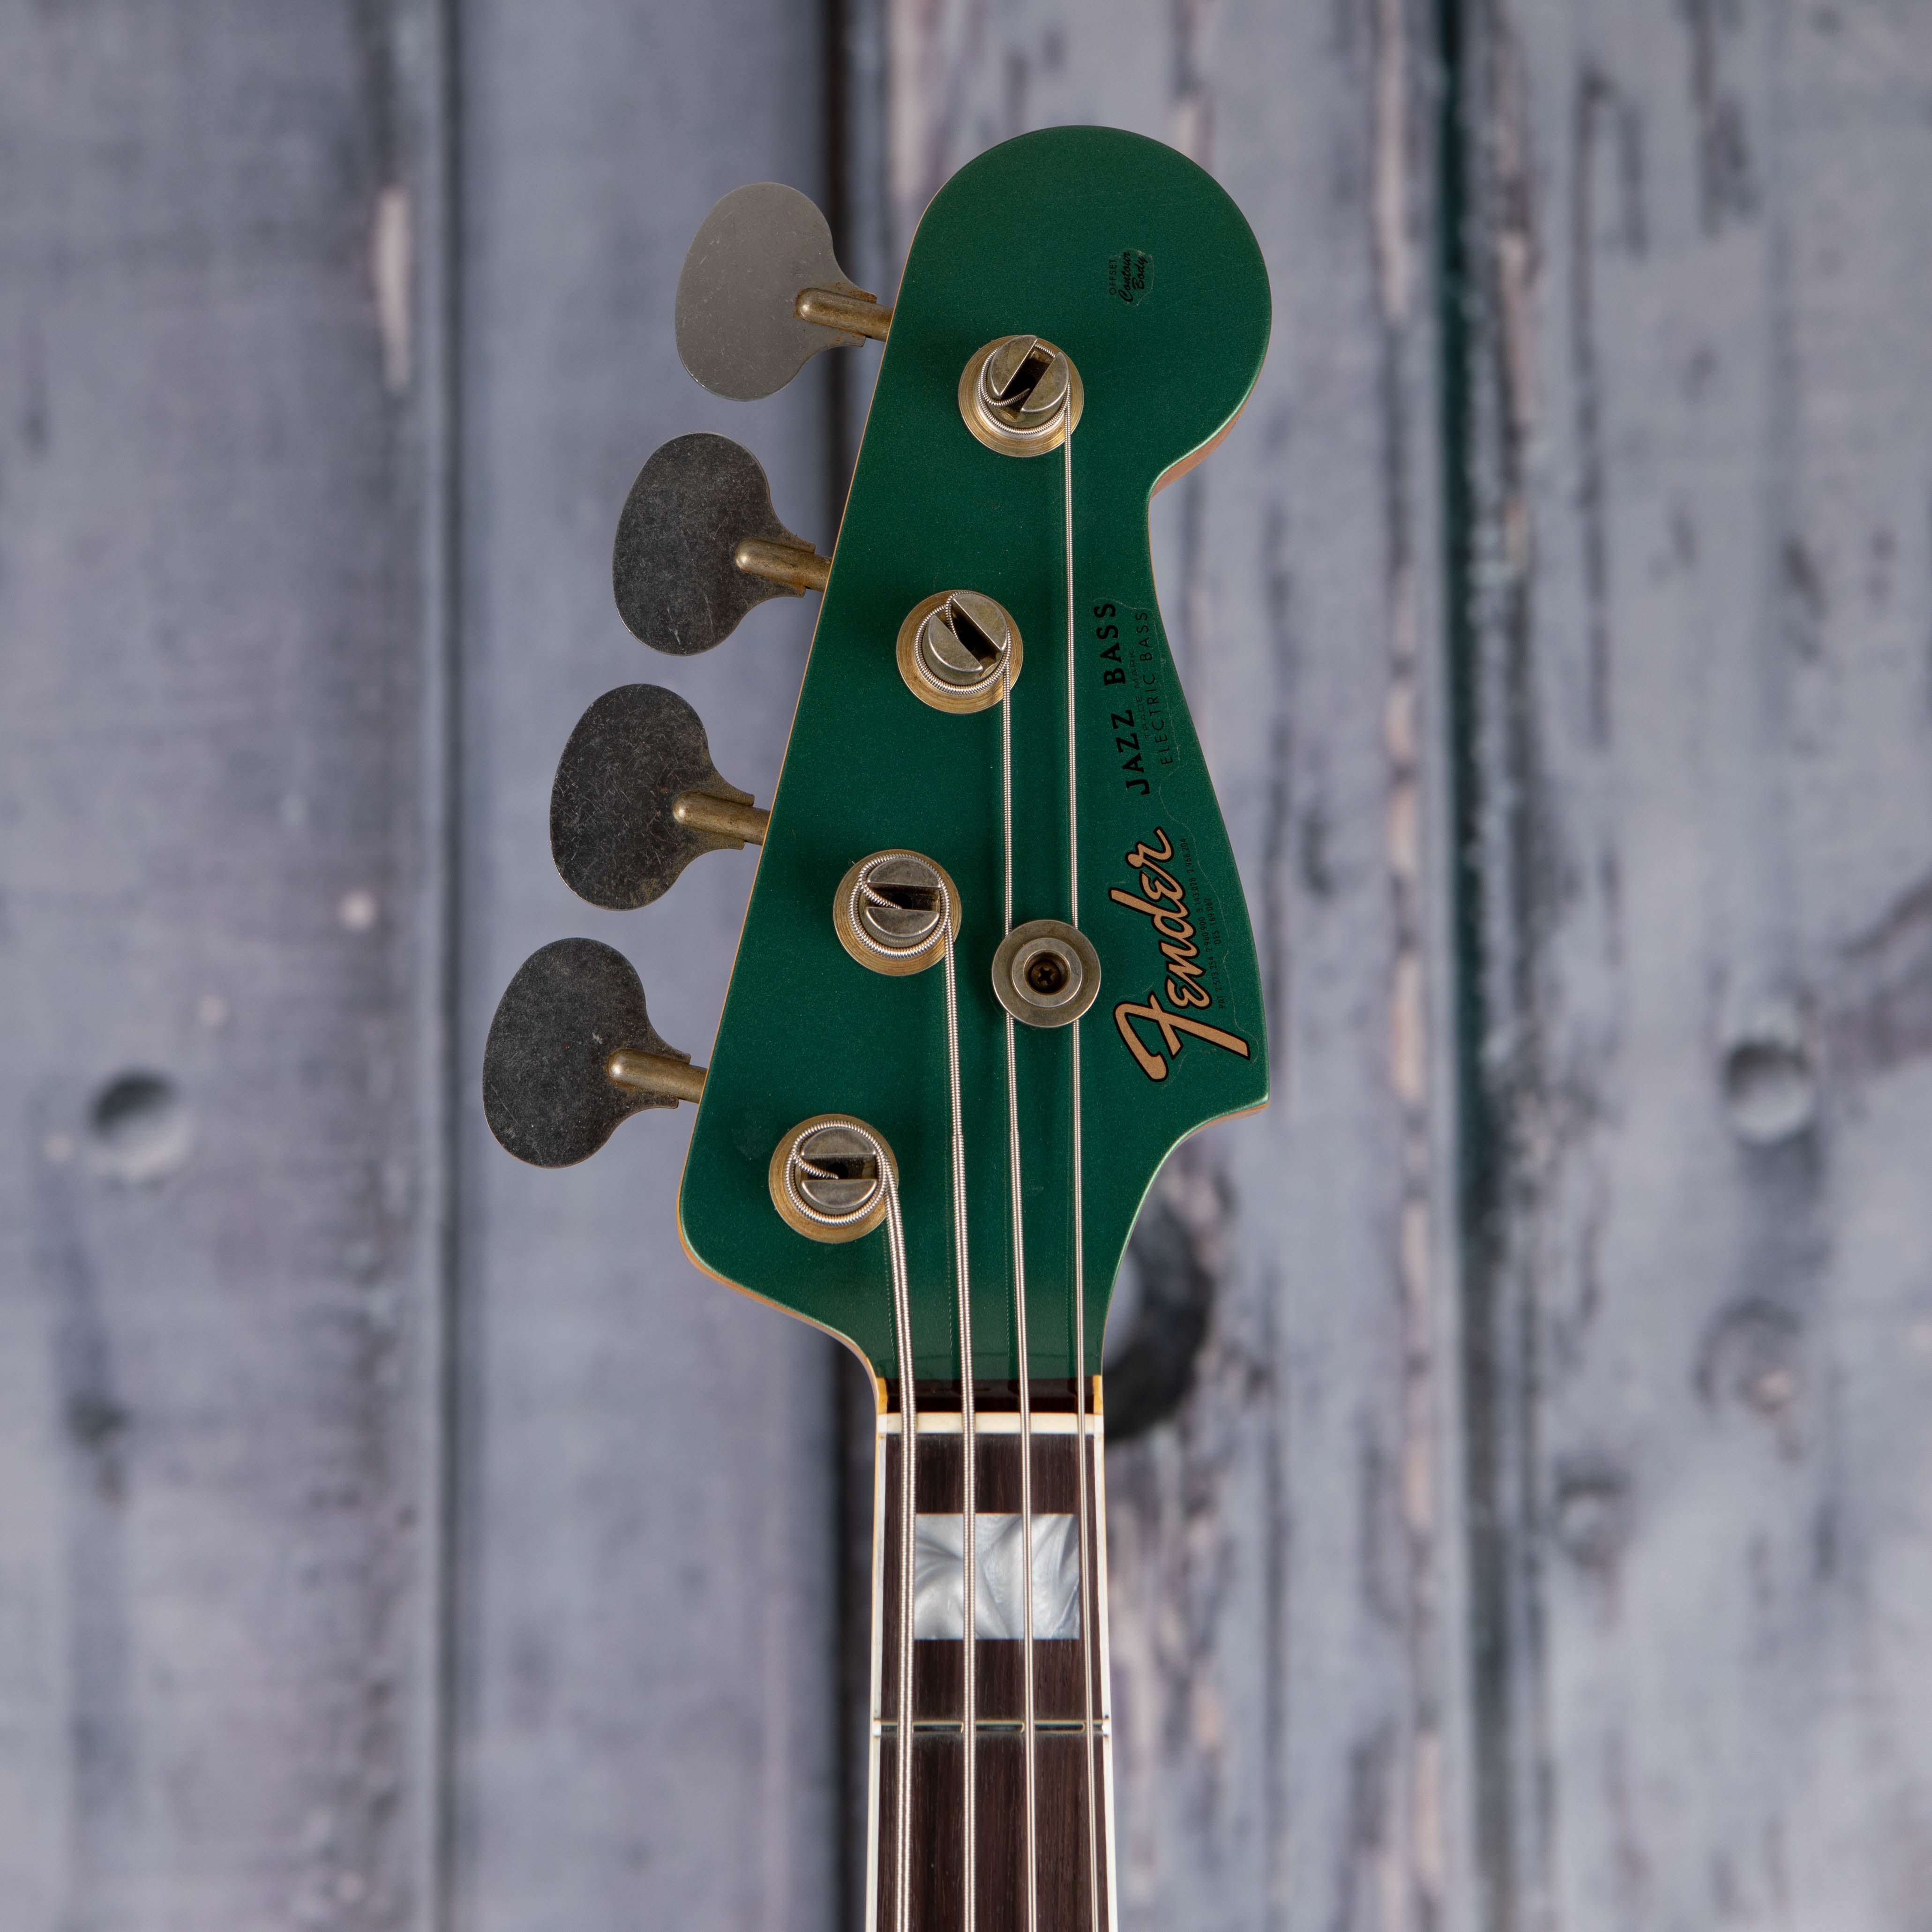 Fender Custom Shop Limited Edition Precision Bass Special Journeyman Relic Electric Bass Guitar, Aged Sherwood Green Metallic, front headstock